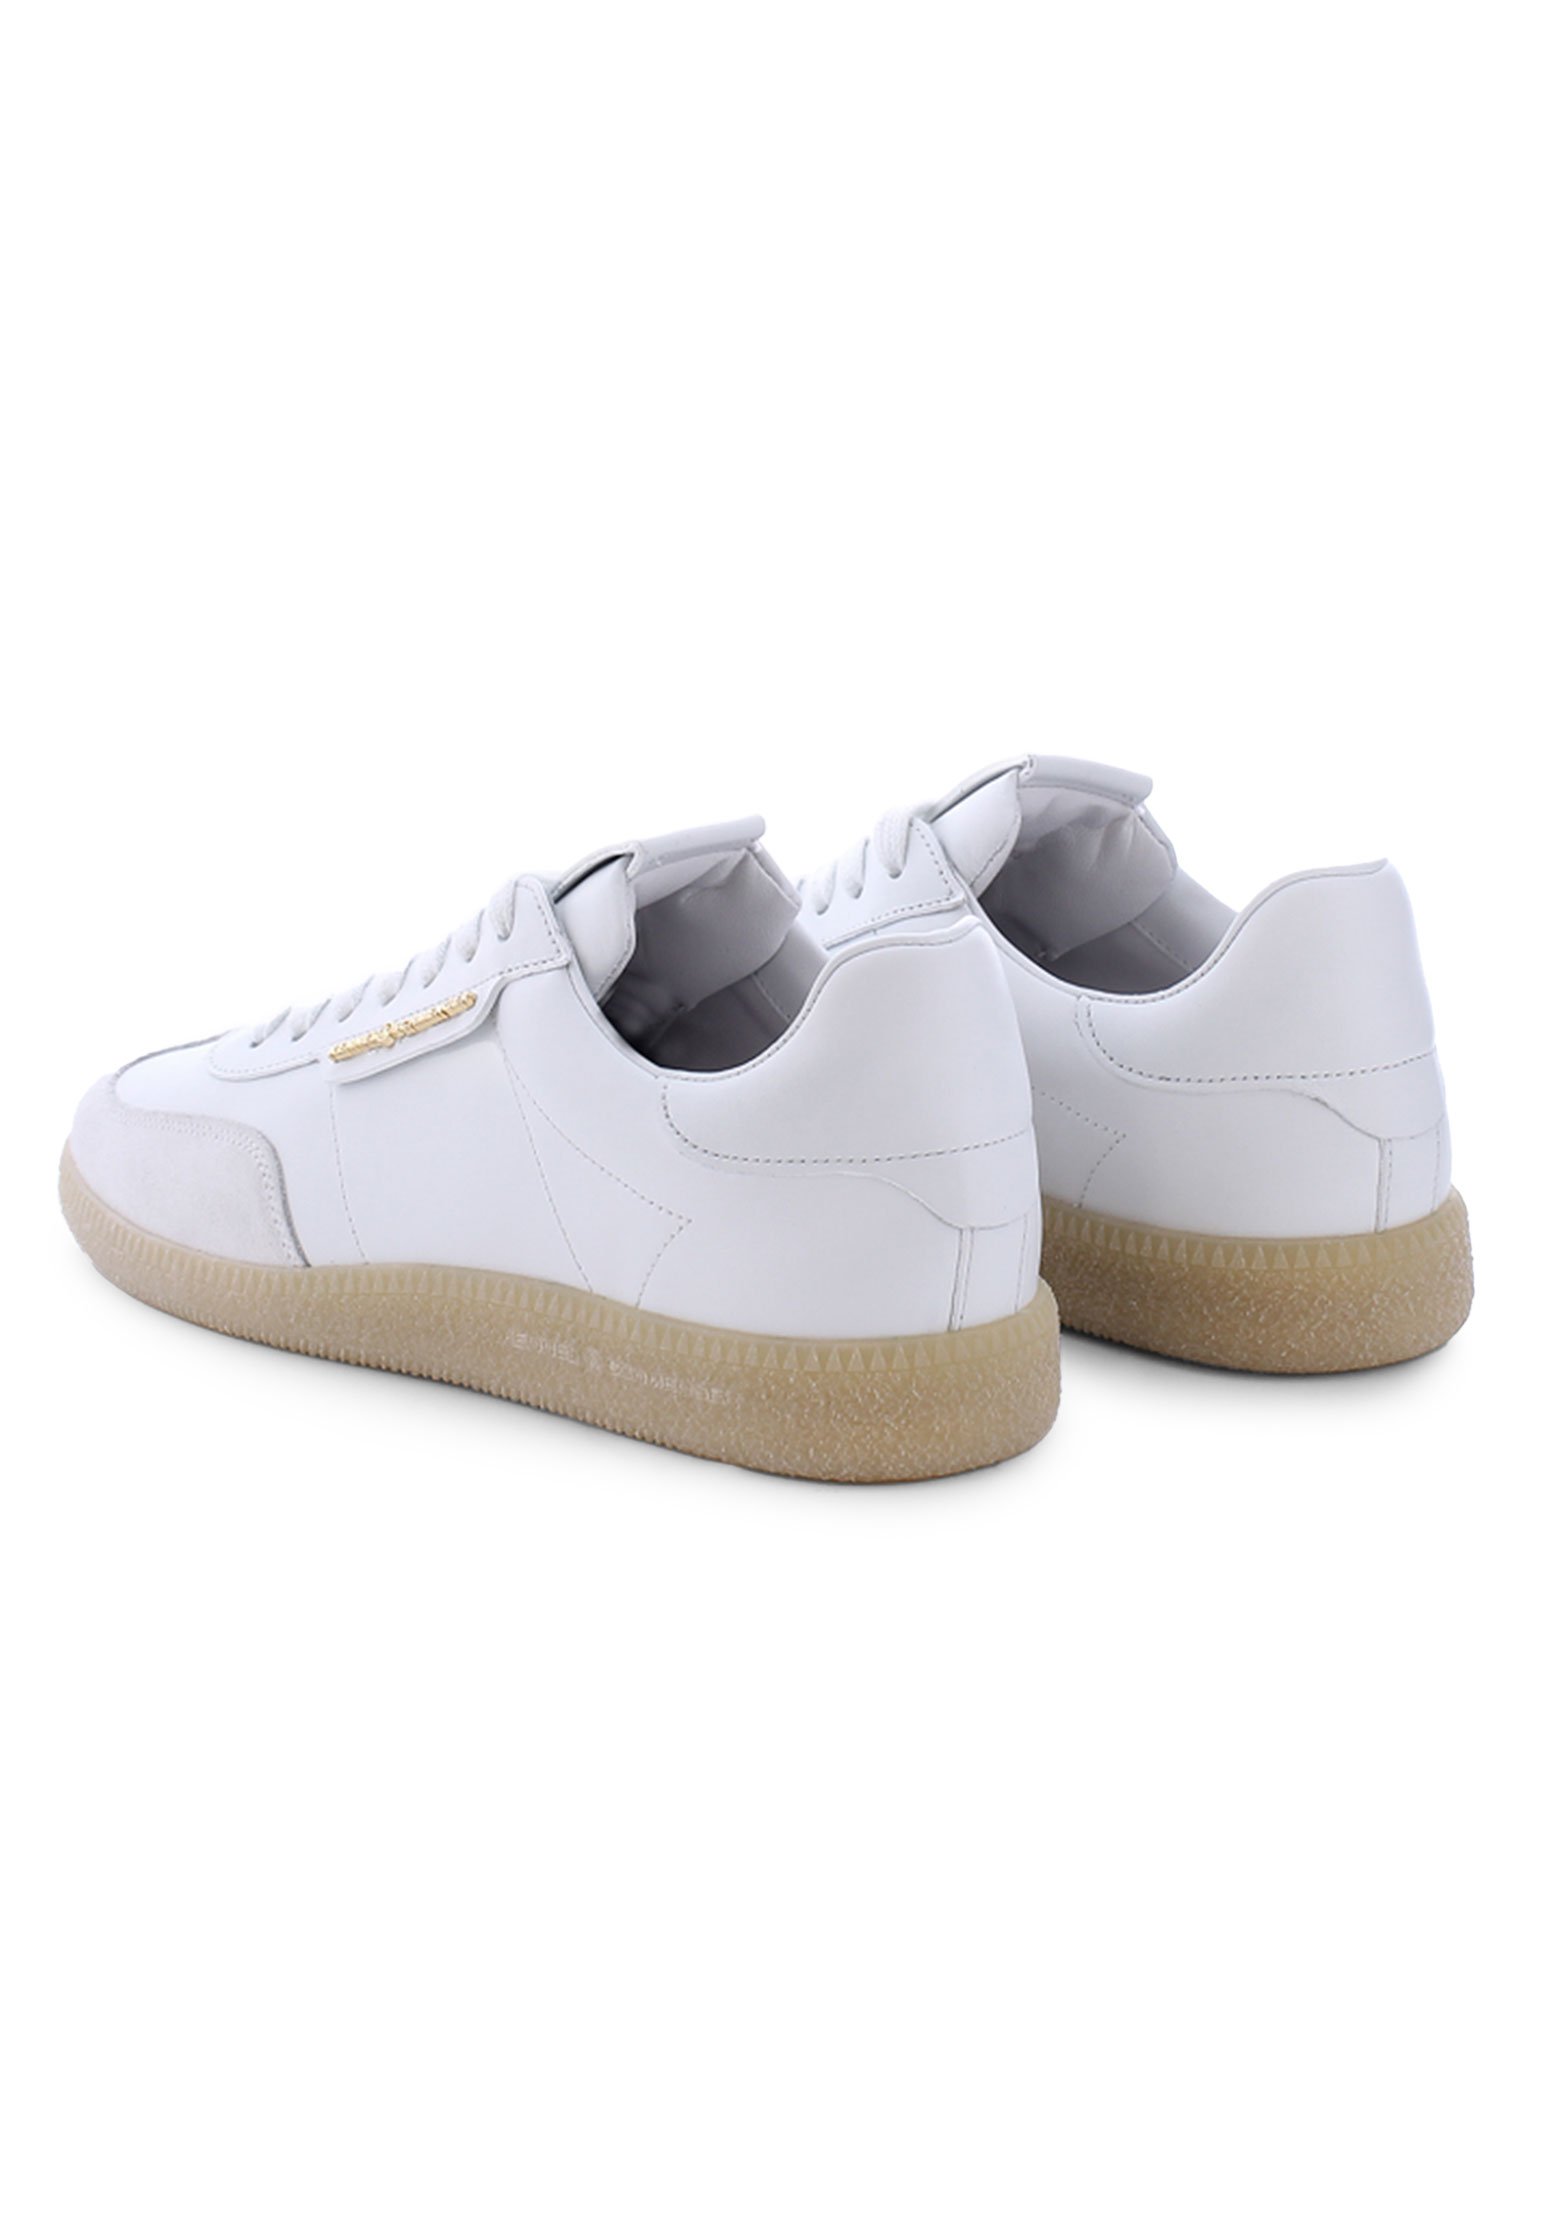 Sneakers KENNEL&SCHMENGER Color: white (Code: 4161) in online store Allure